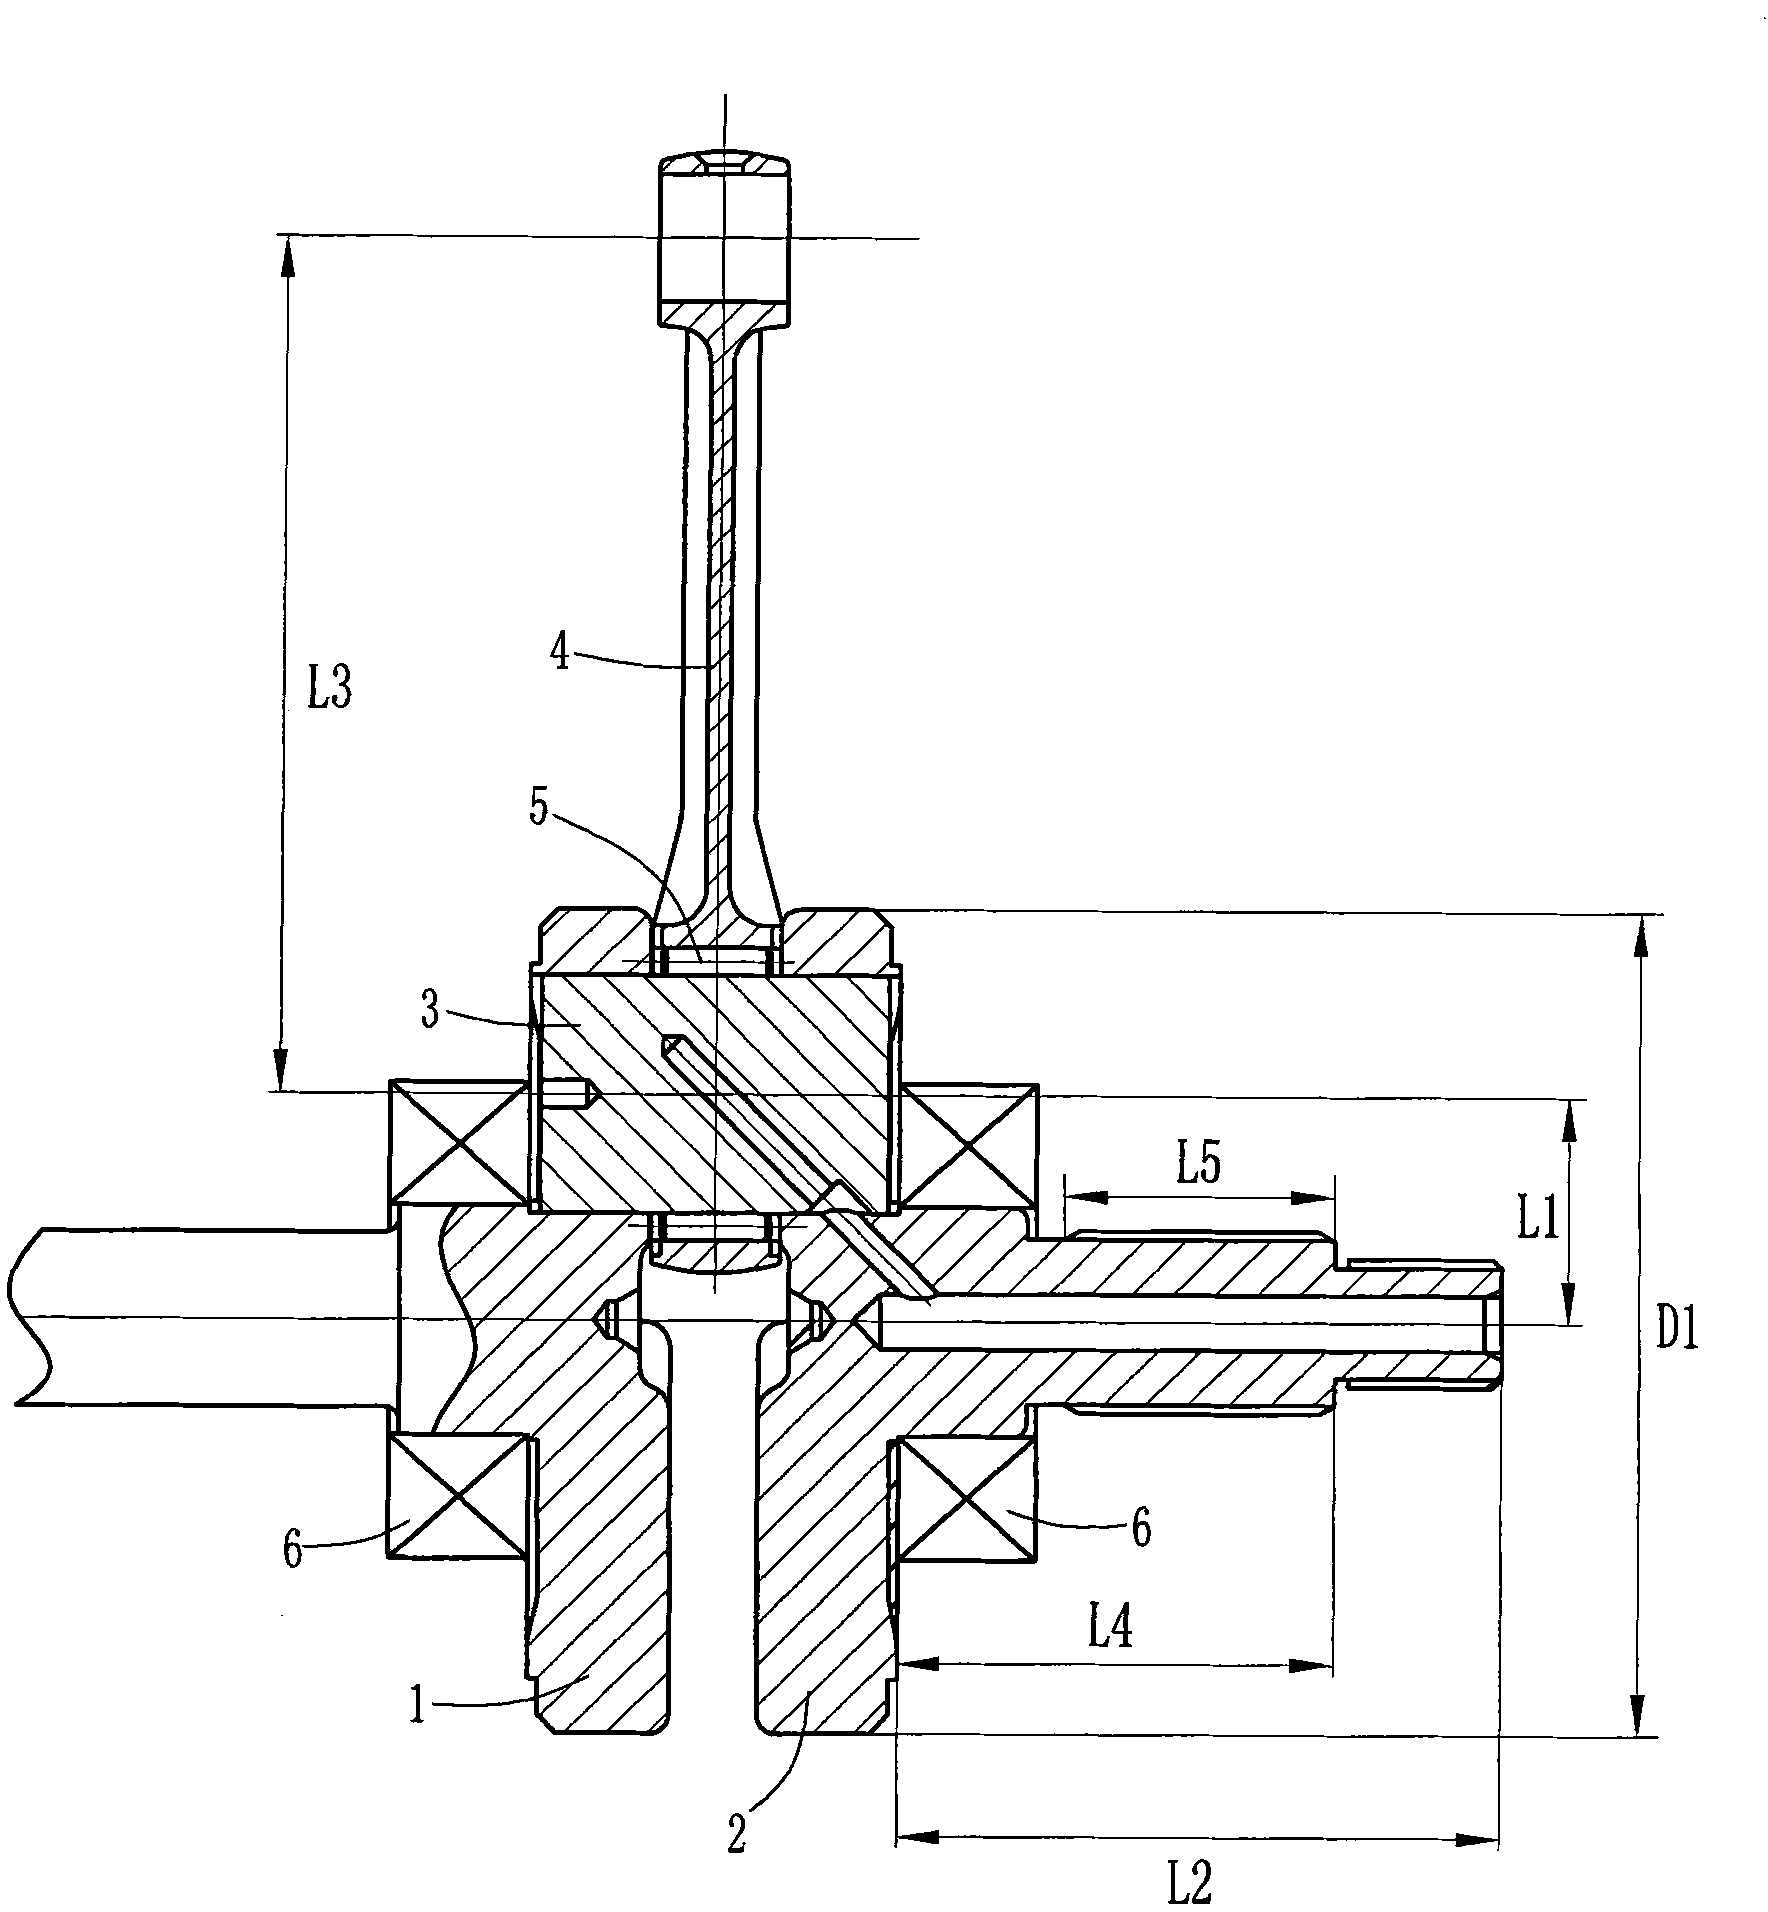 Crank-connecting rod mechanism for engine of miniature cross-country motorcycle